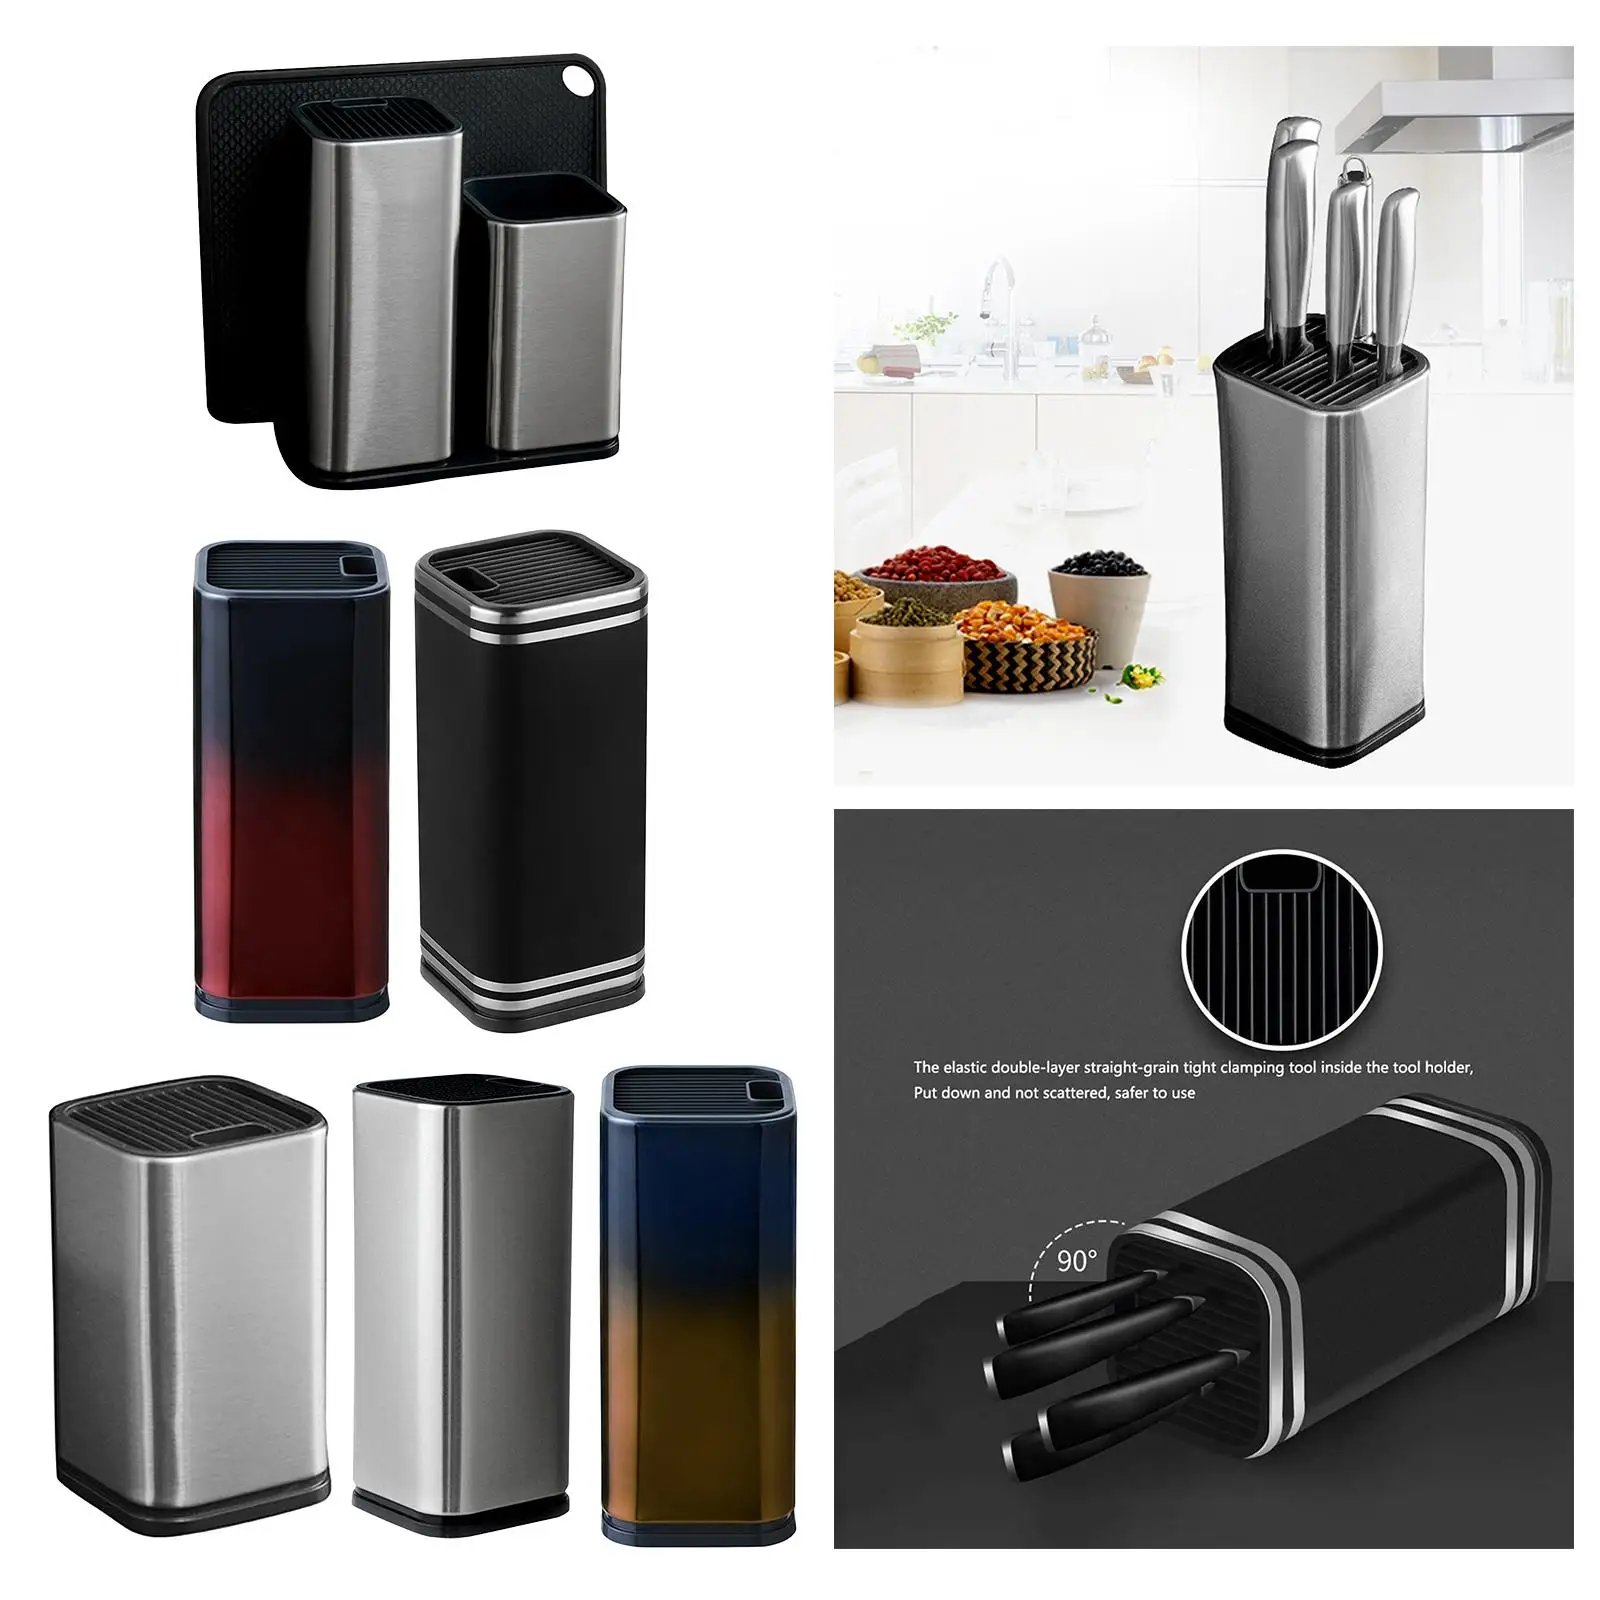 Stainless Steel Knife Block Holder Save Space Keep Tableware Cleaning Knife Organizer Slot Design